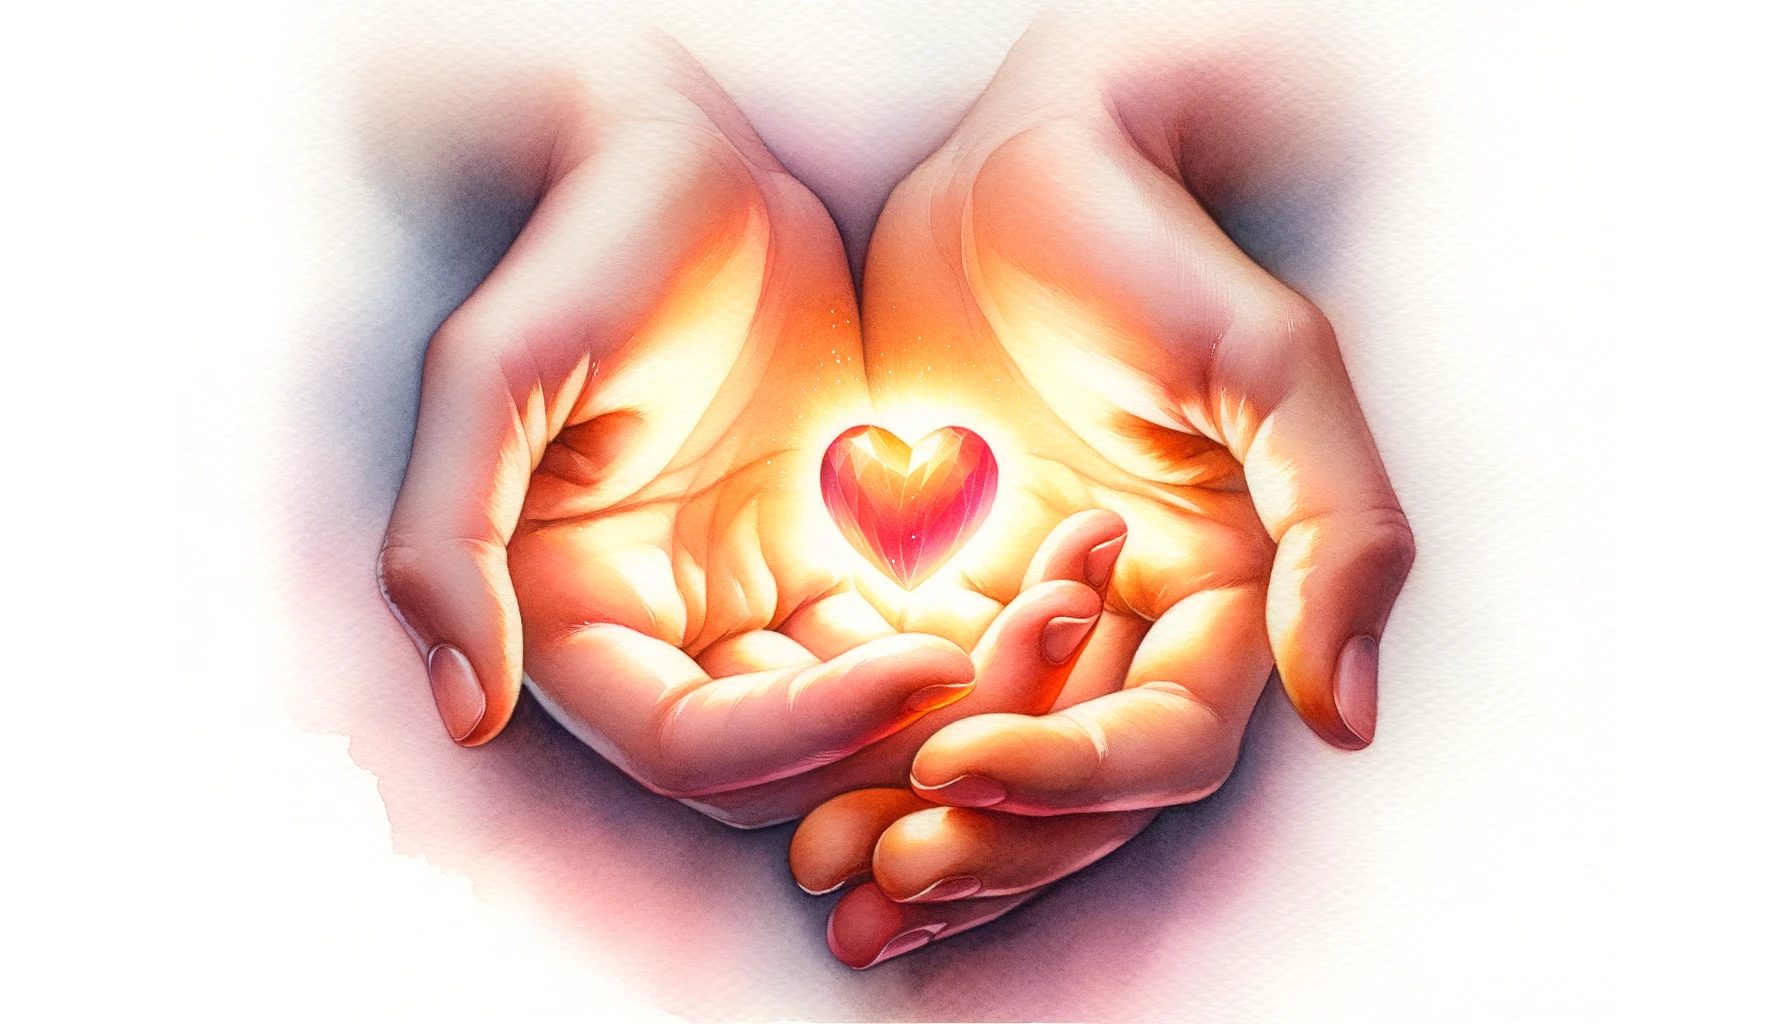 Pair of hands holding a tiny, glowing heart, symbolizing the preciousness of every life and God's care for babies.